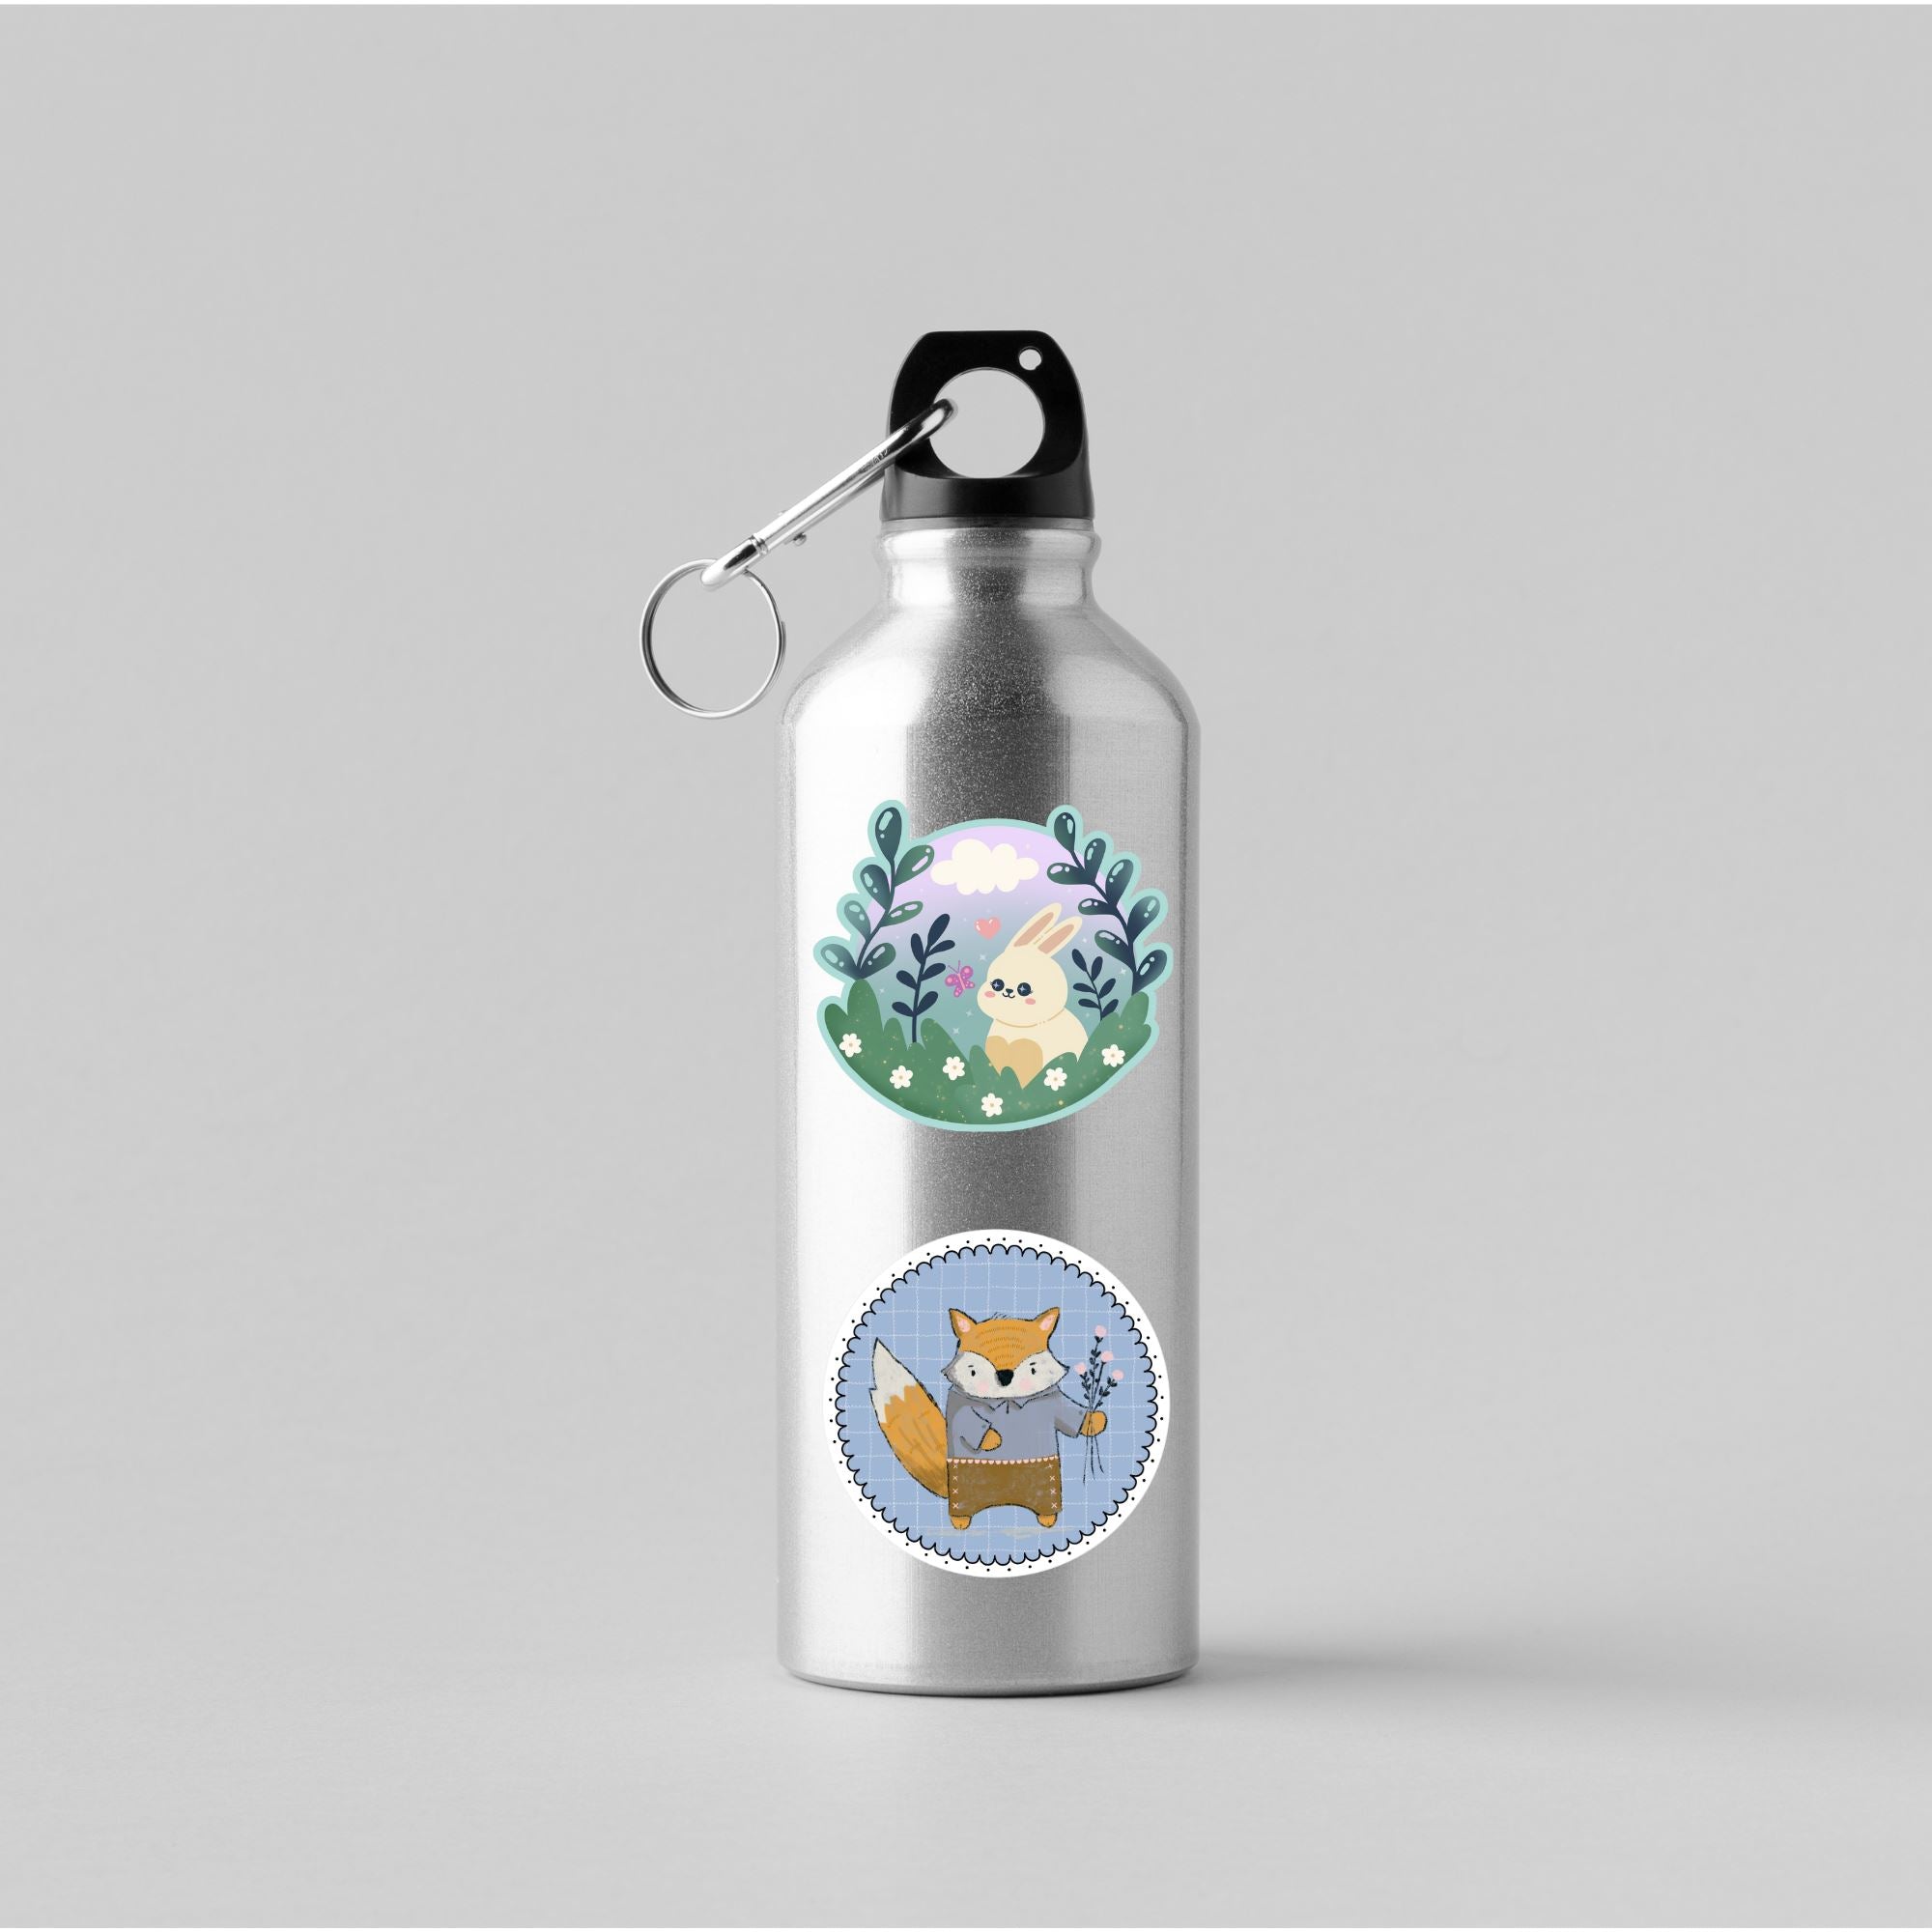 A silver water bottle with kawaii bunny in a meadow and raccoon holding flowers matte vinyl die cut stickers on it.